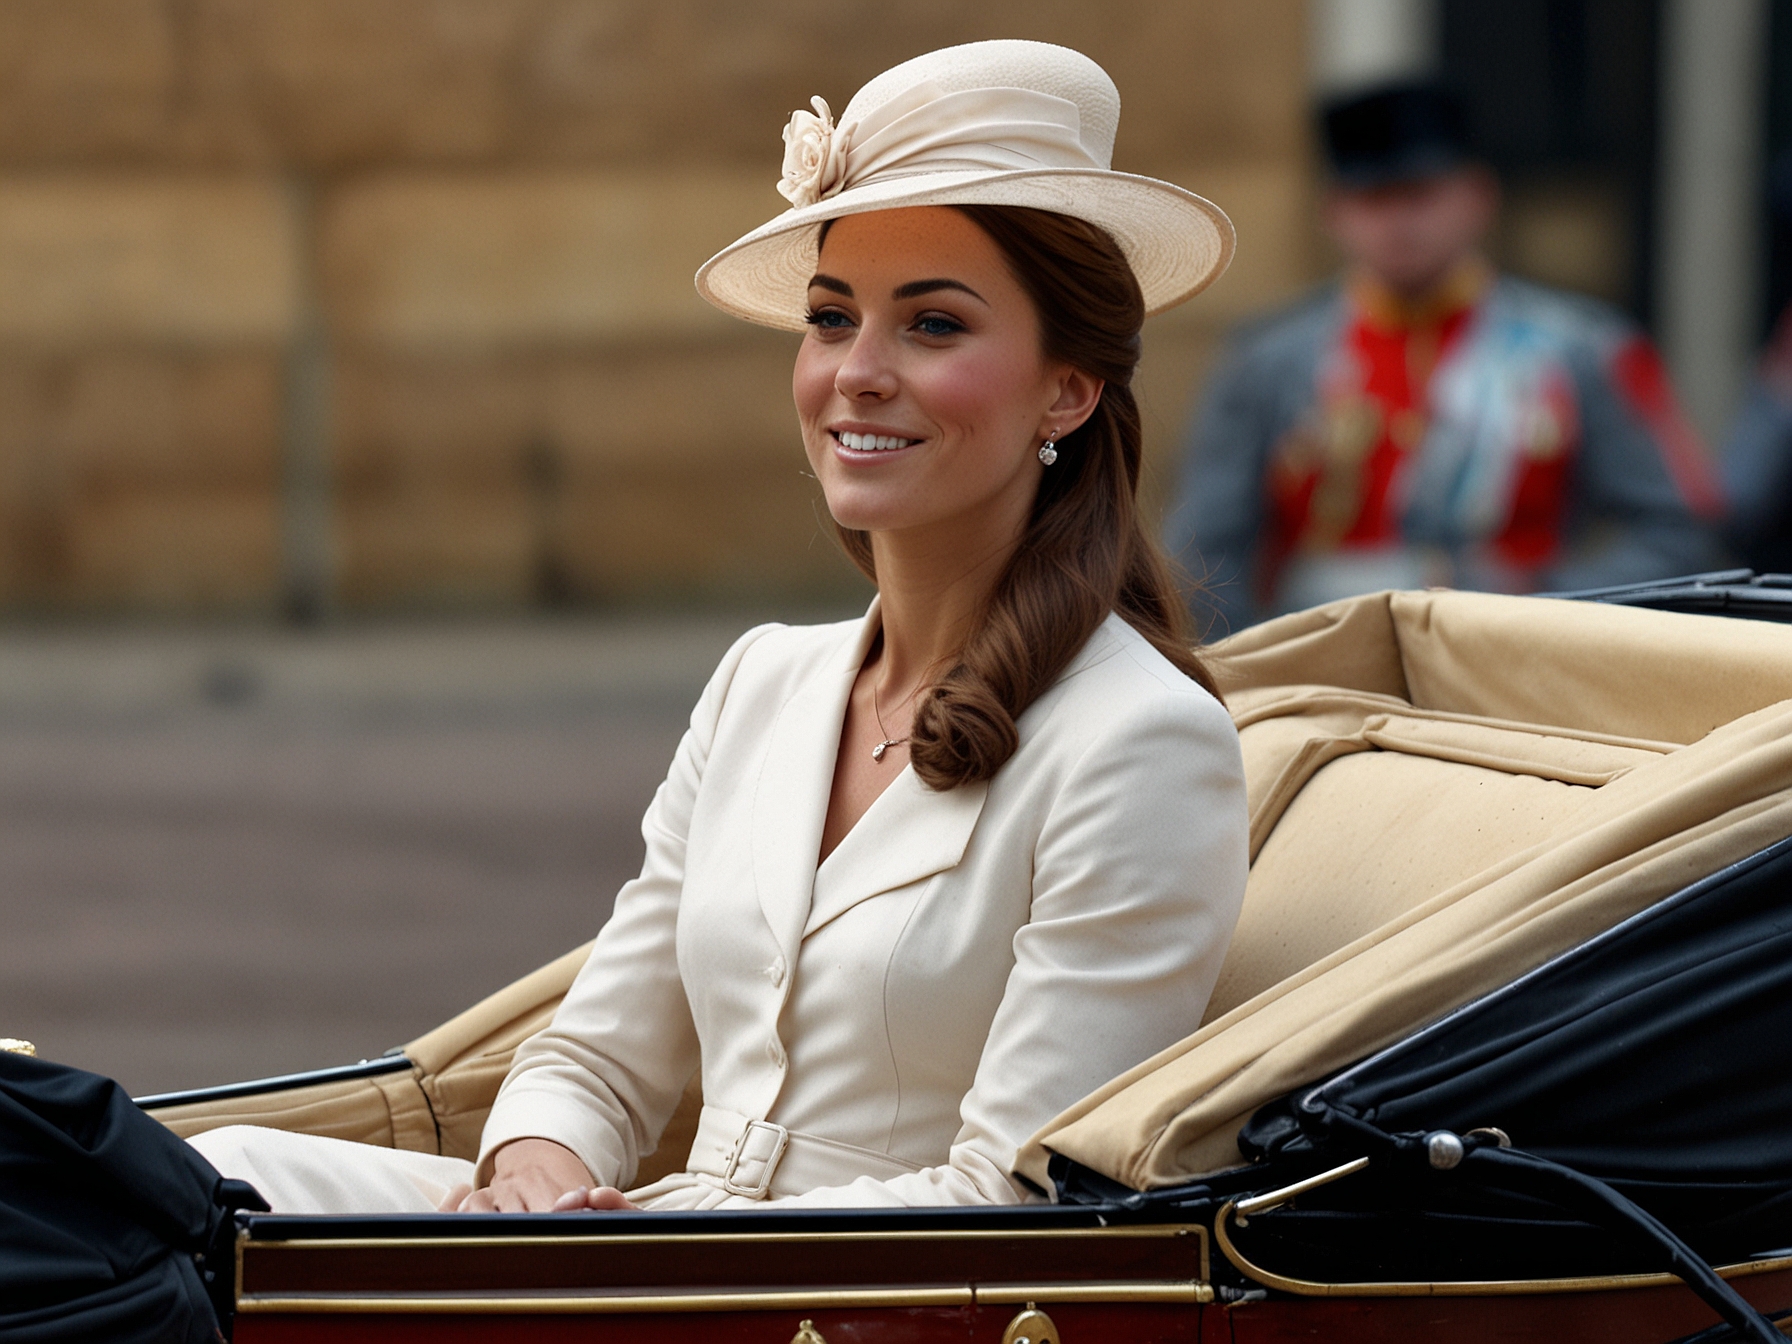 Kate Middleton, elegantly dressed in a pristine white outfit with matching hat, waves to the crowd while riding in a carriage during the Trooping the Colour procession.